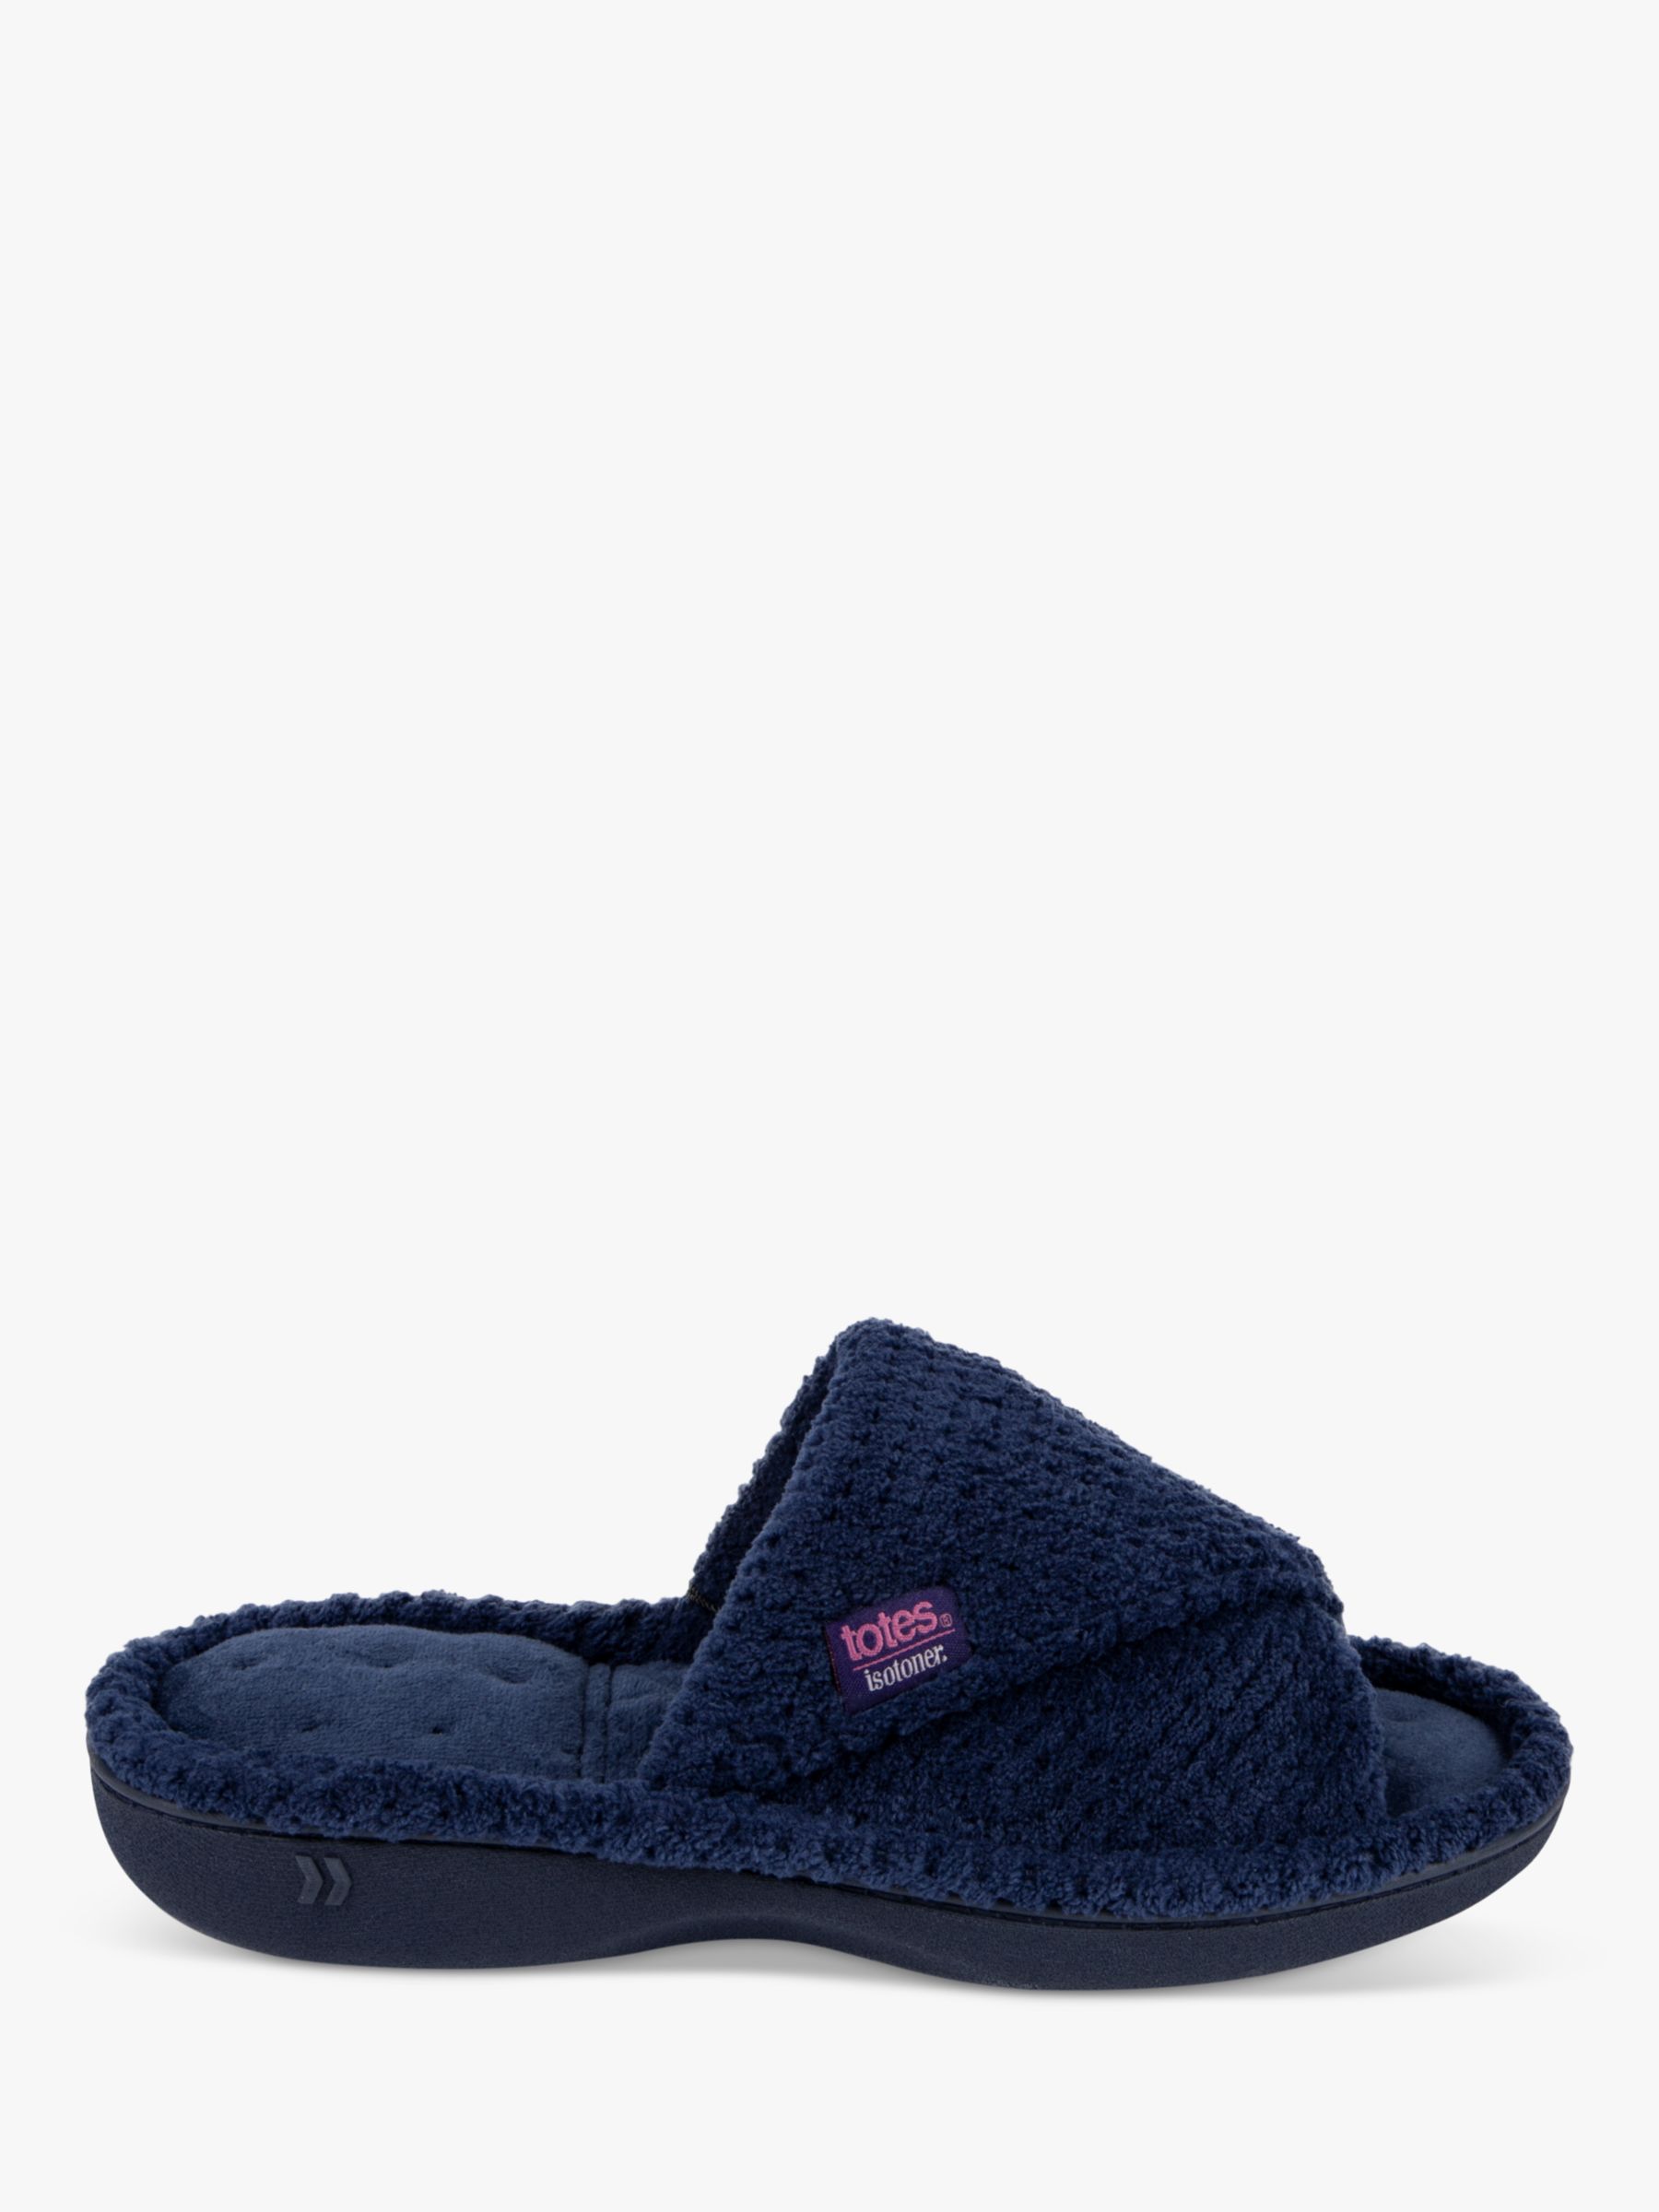 totes Textured Popcorn Turnover Mule Slippers, Navy, 4